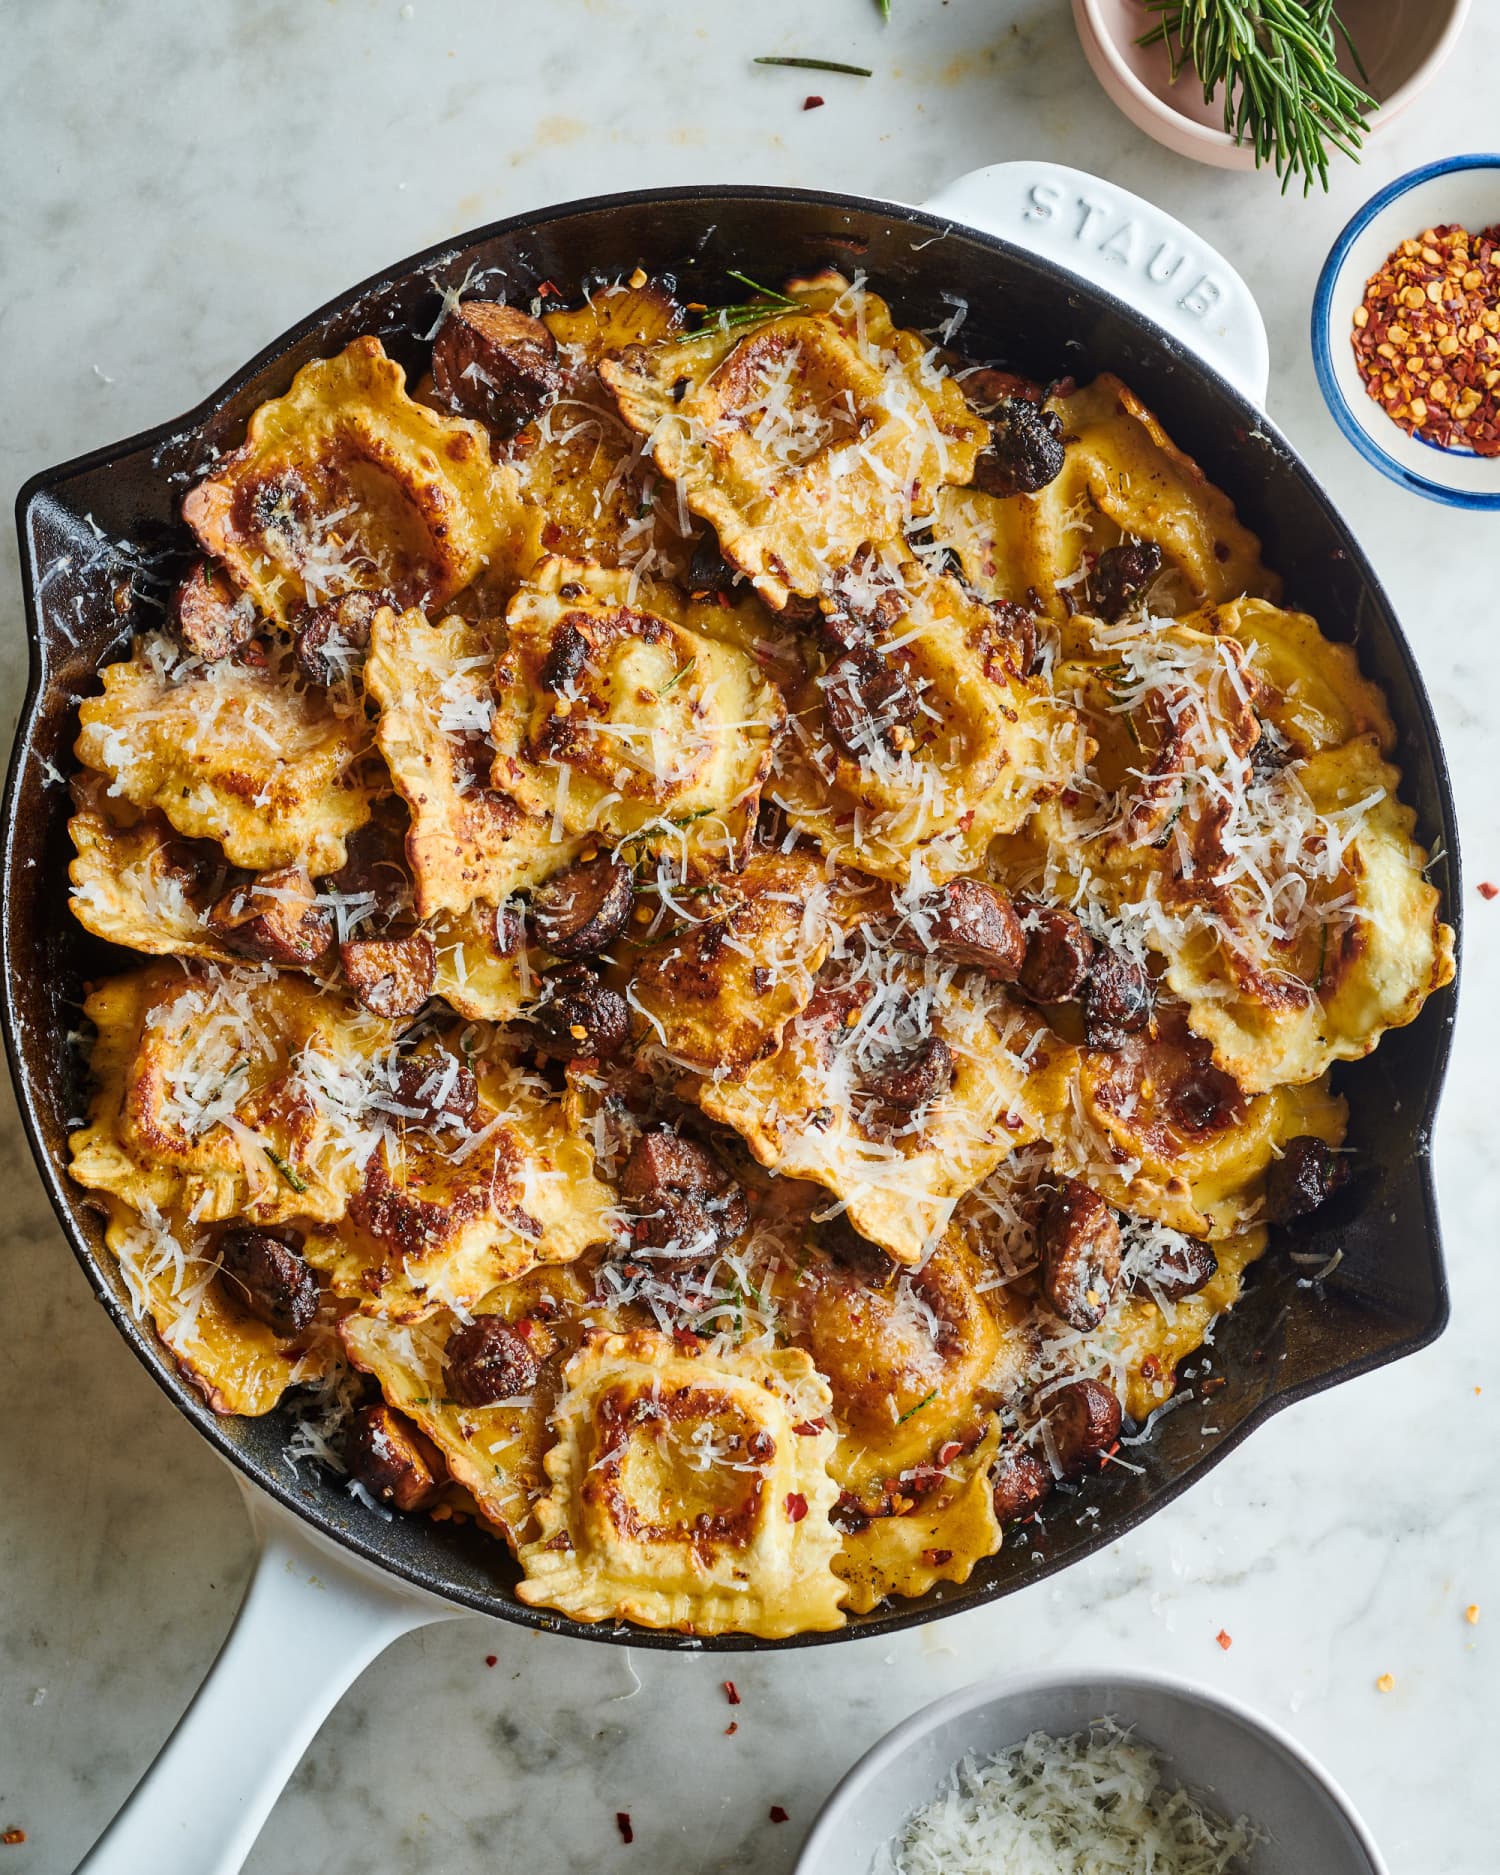 Crispy Skillet Ravioli with Garlic-Butter Mushrooms Is as Good as It Sounds